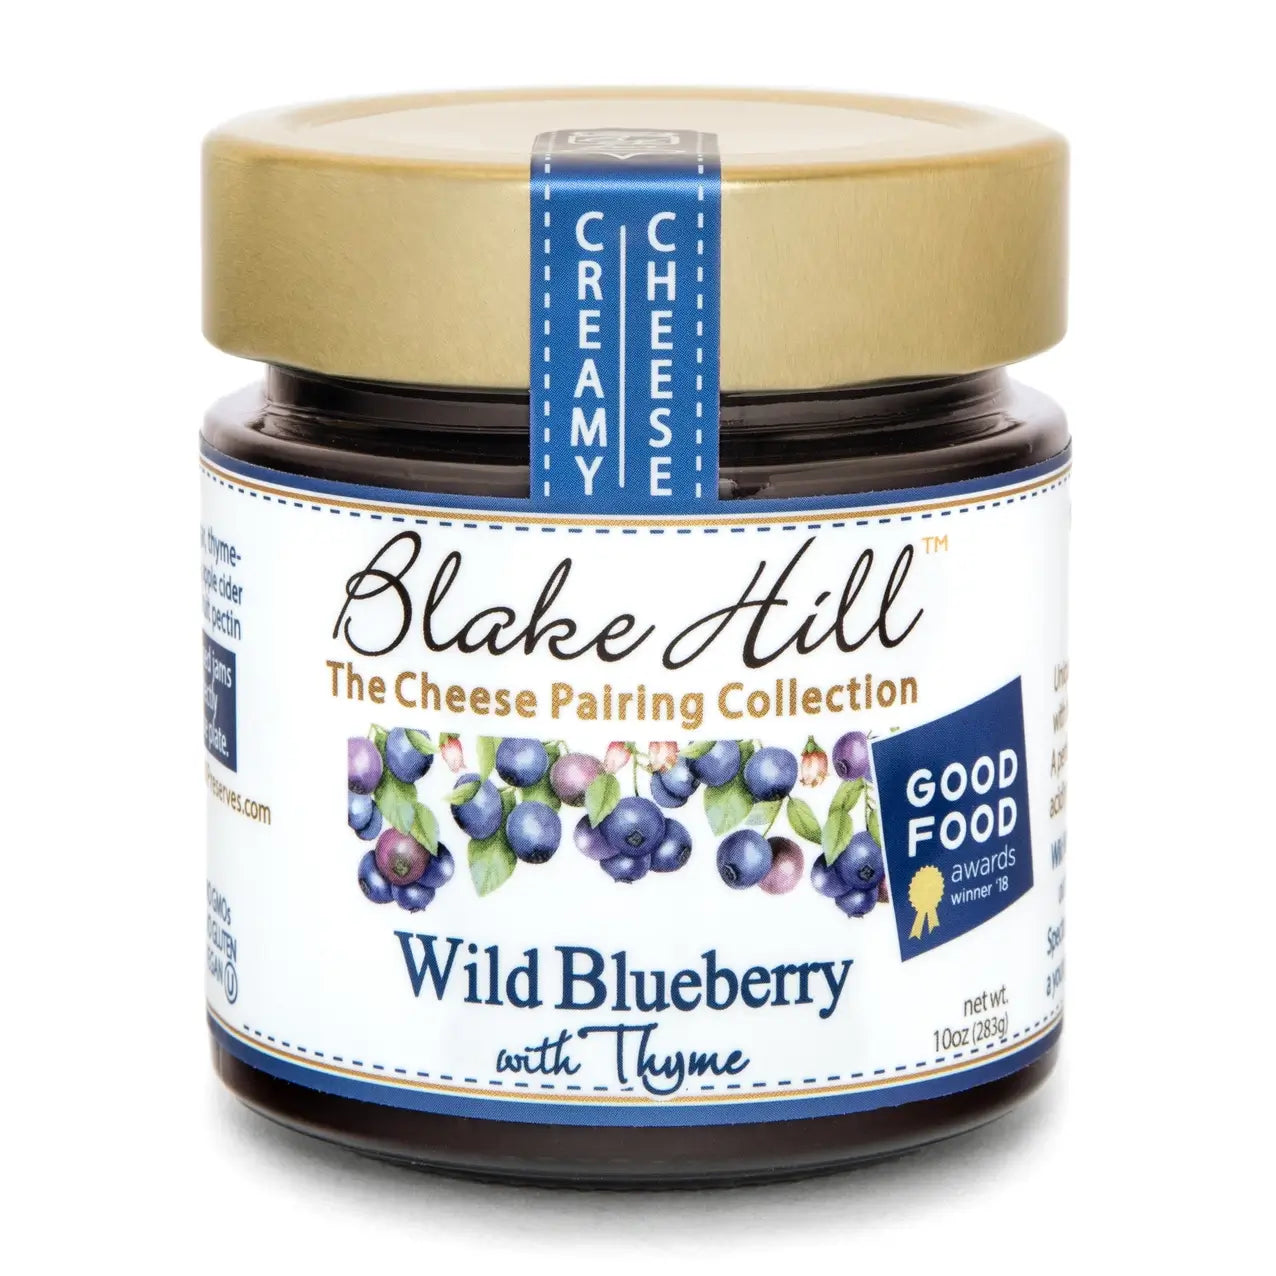 Blake Hill Preserves Wild Blueberry with Thyme jam in a glass jar. 